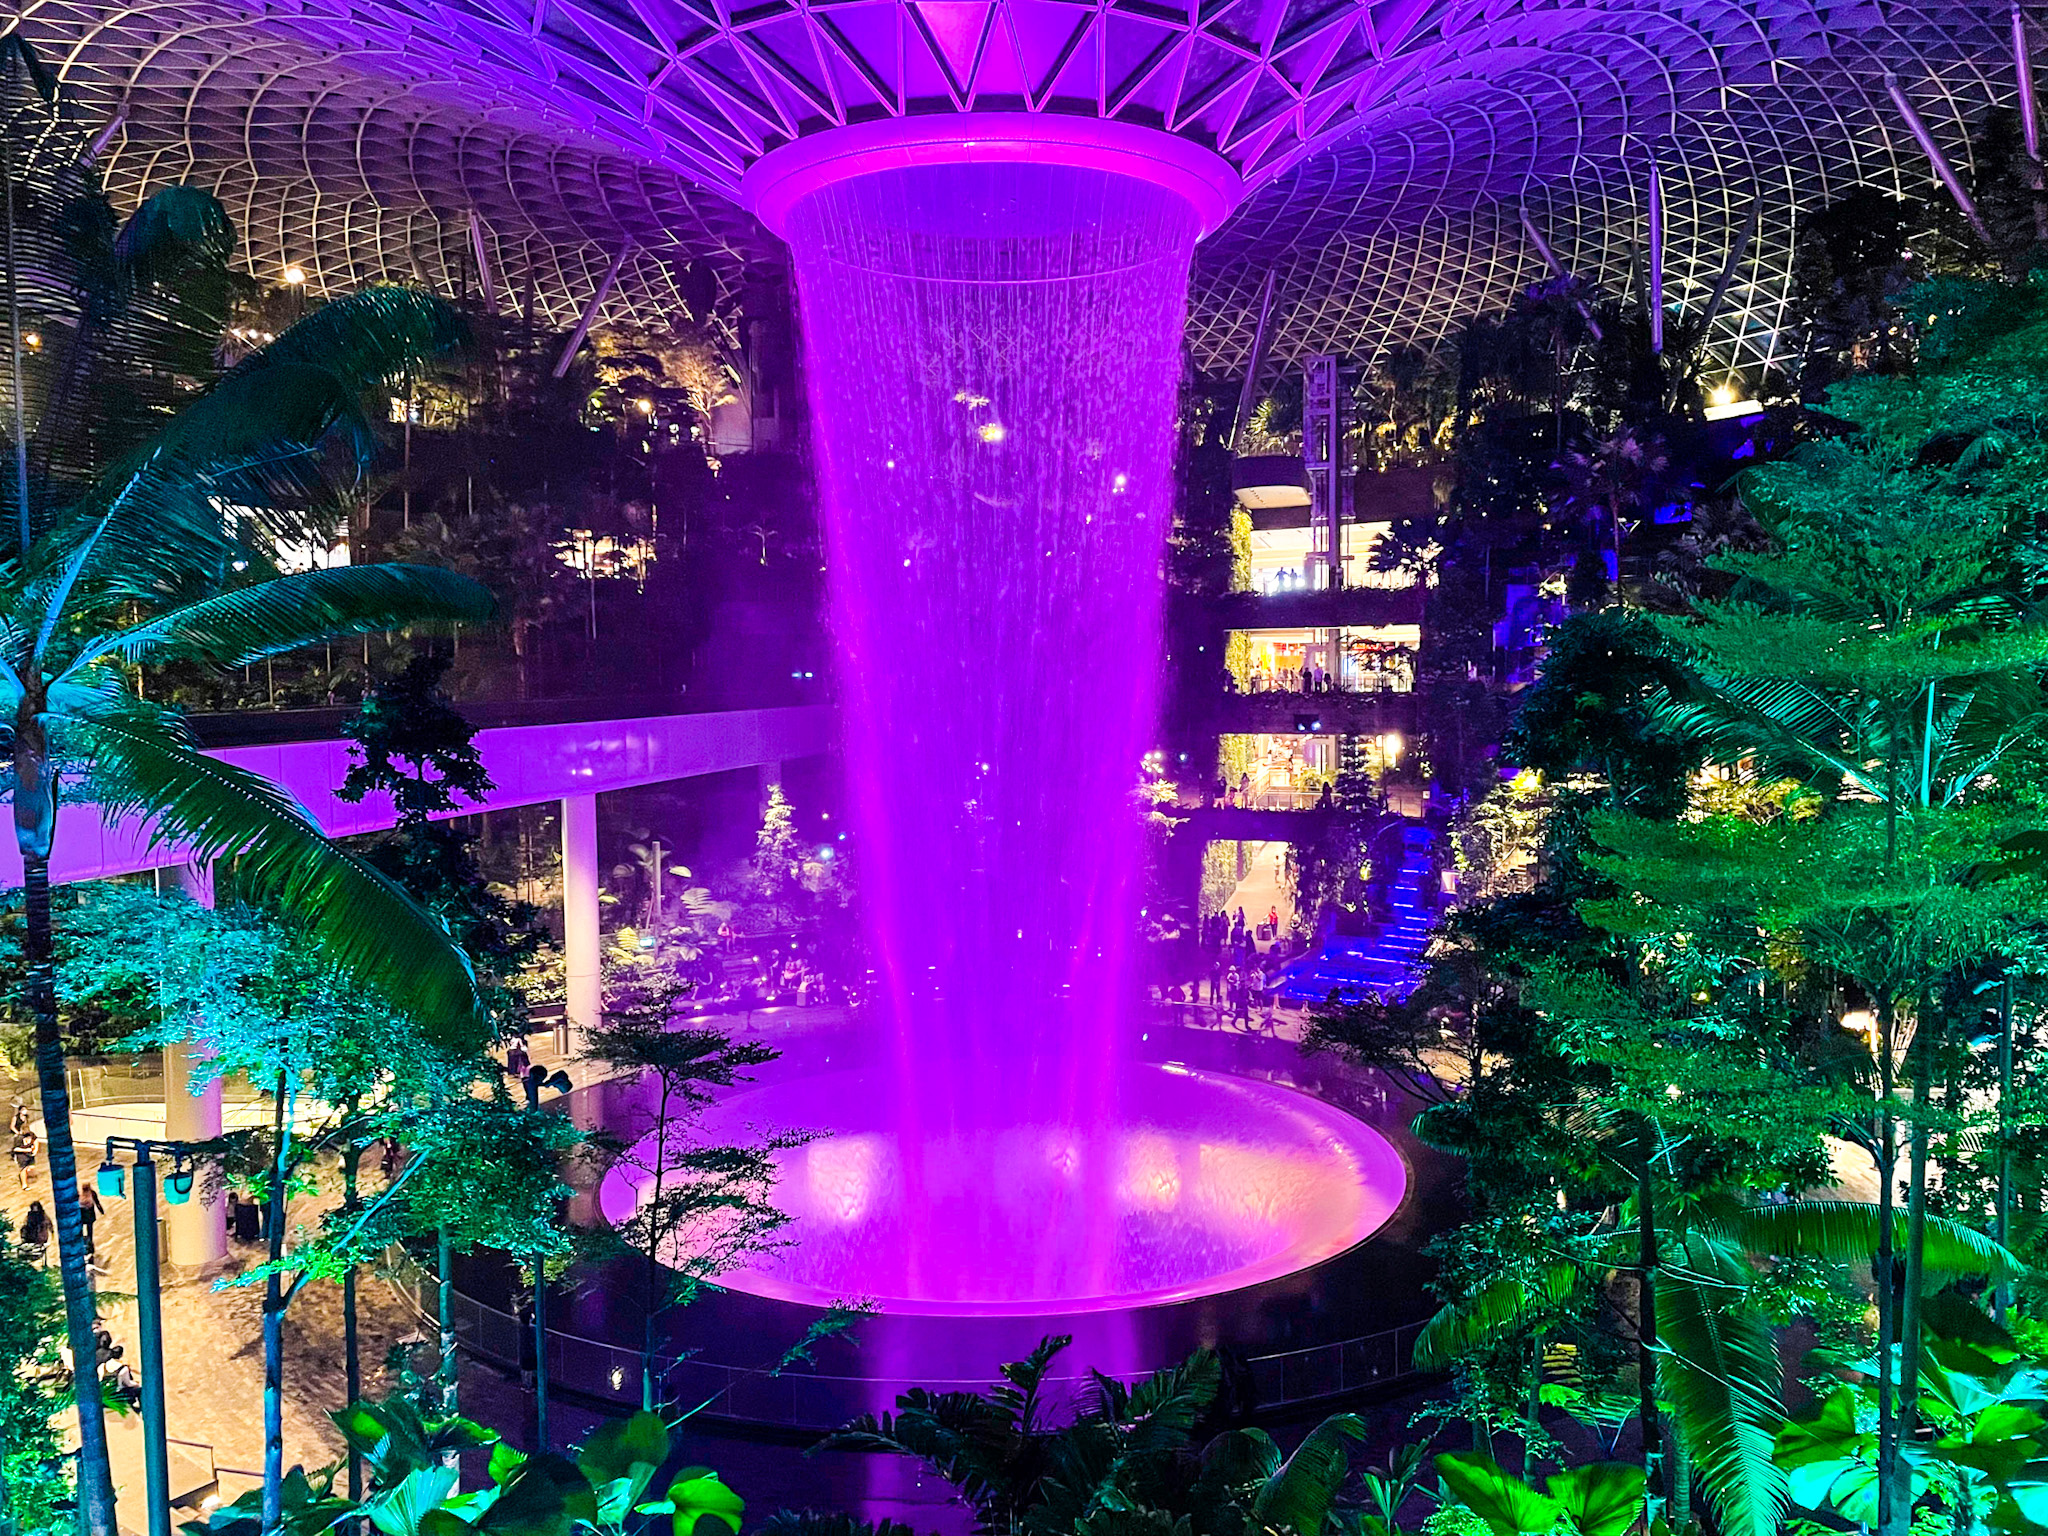 We spent 20 hours in the Singapore Airport